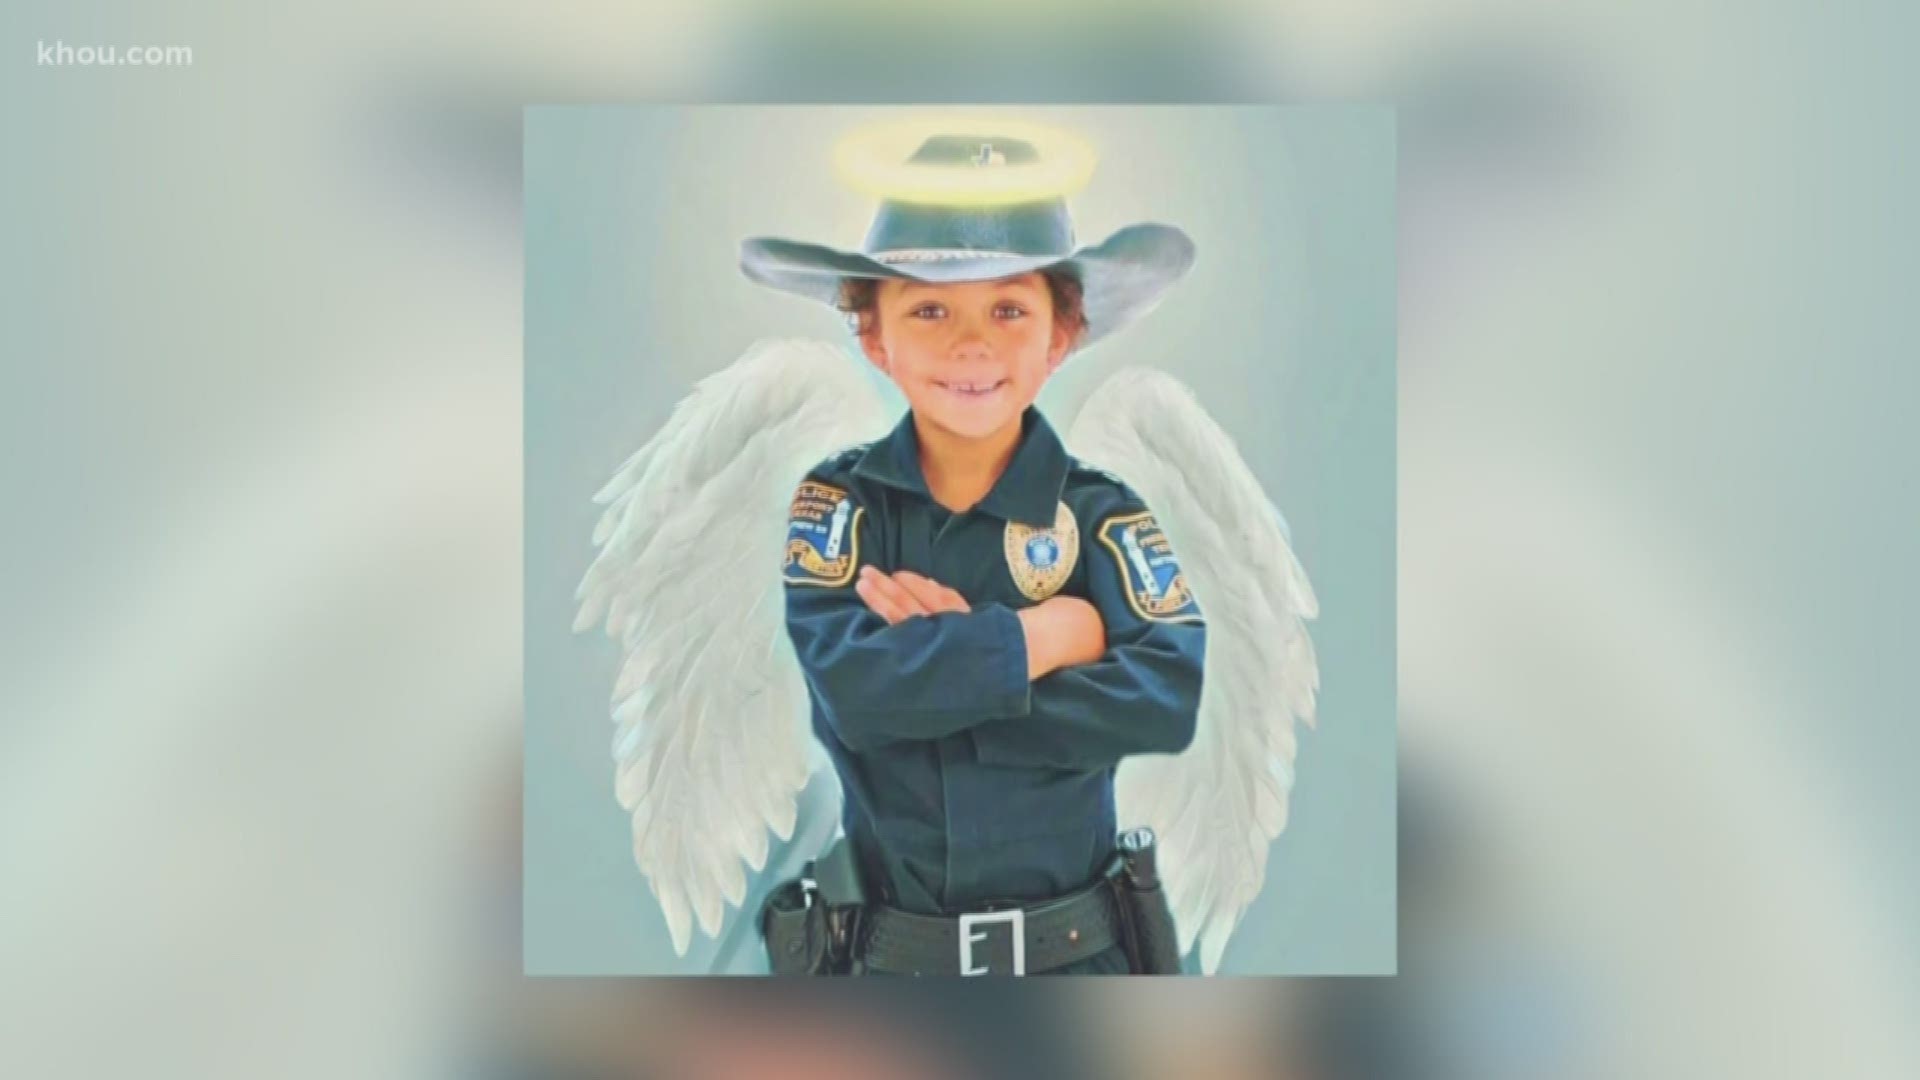 Law enforcement from across the country and Texas expected to attend the 7-year-old honorary officer's funeral this week.